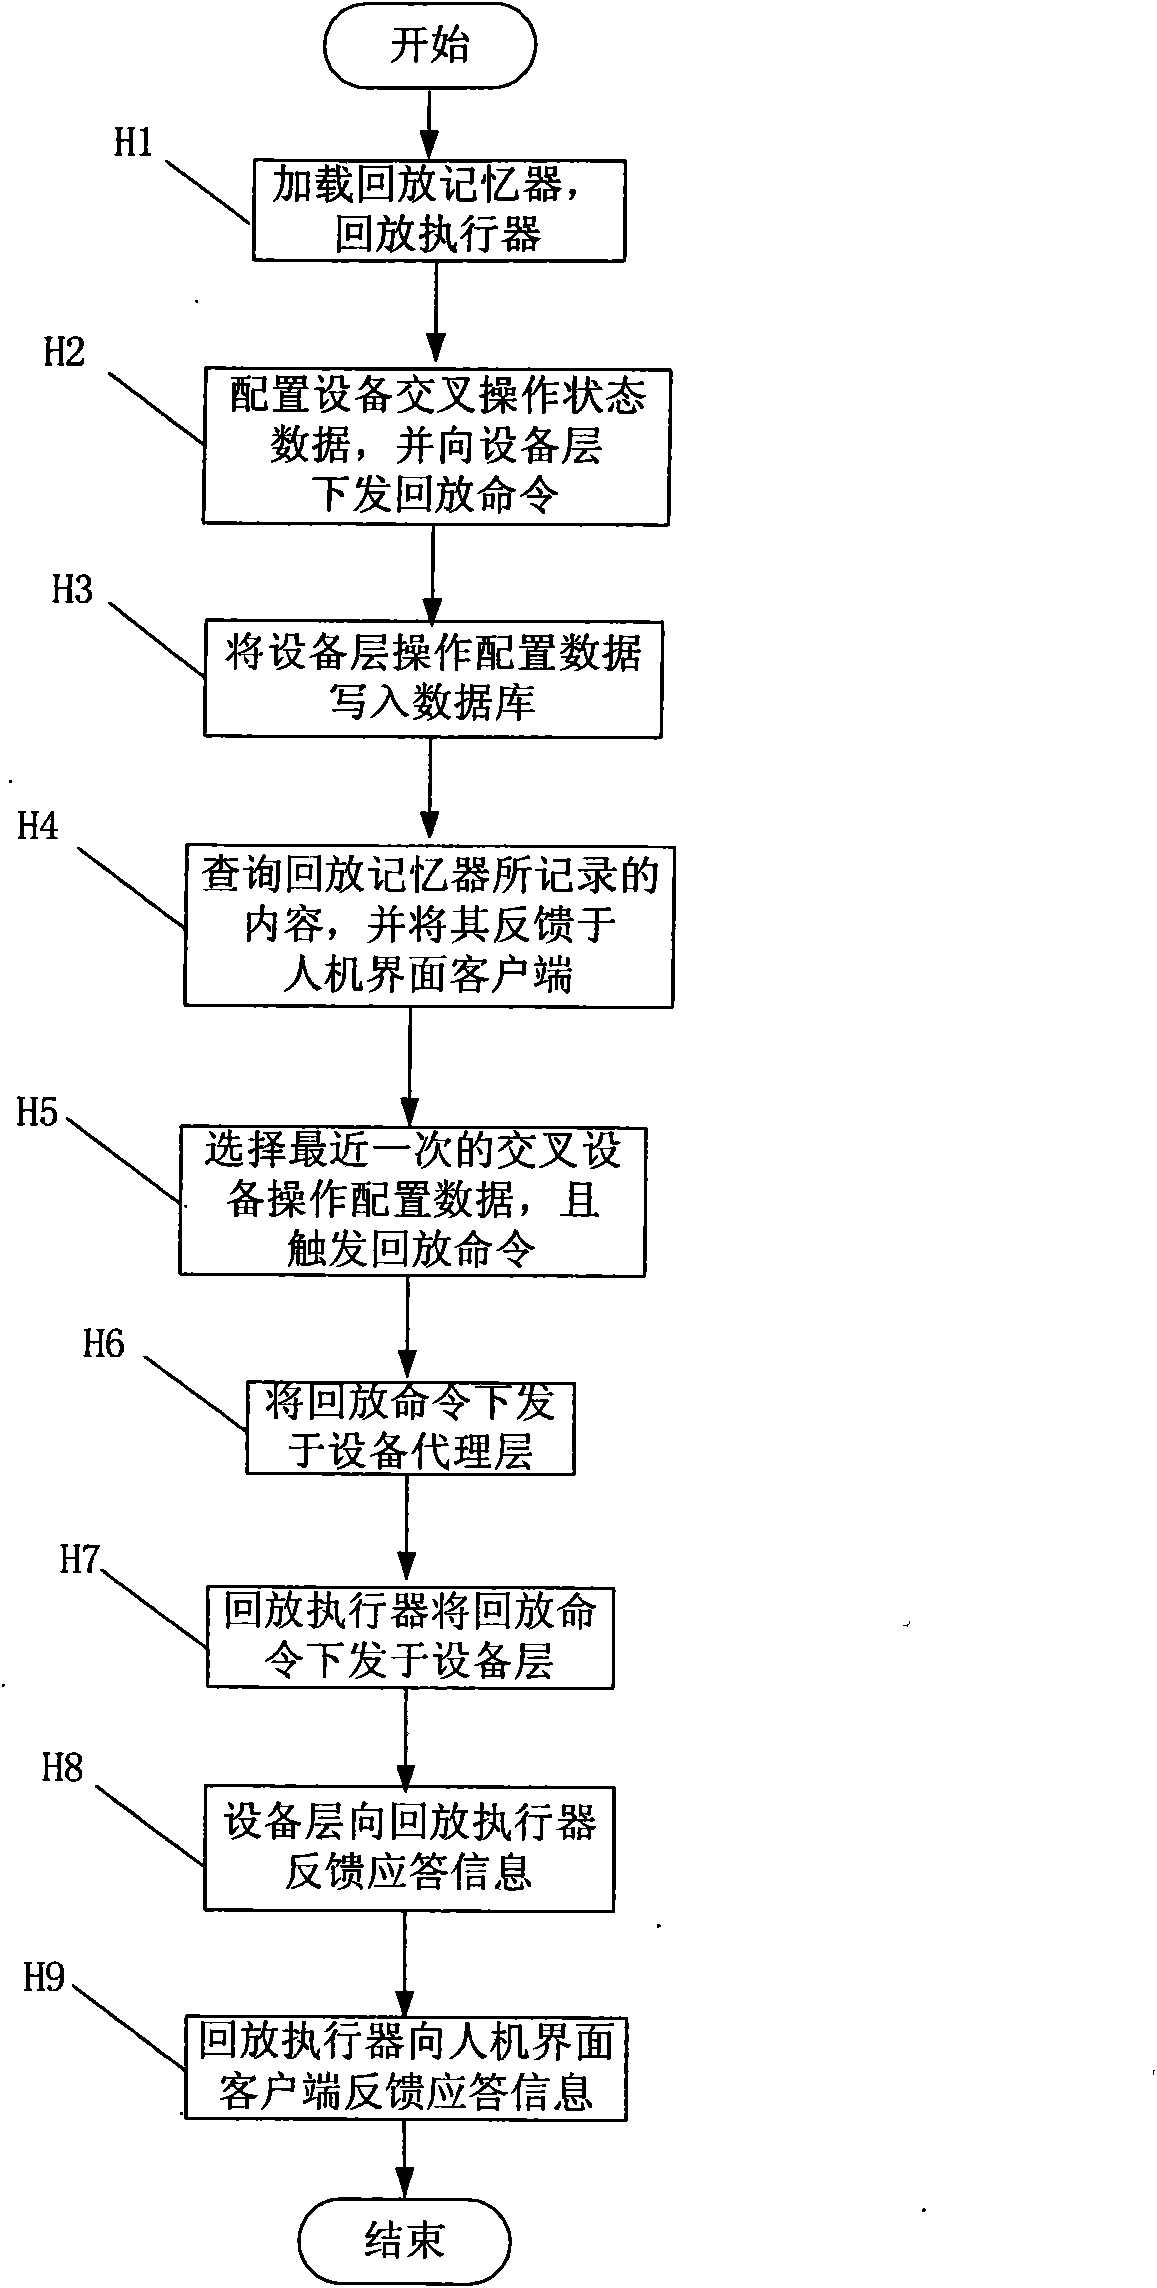 Network management playback system and method thereof